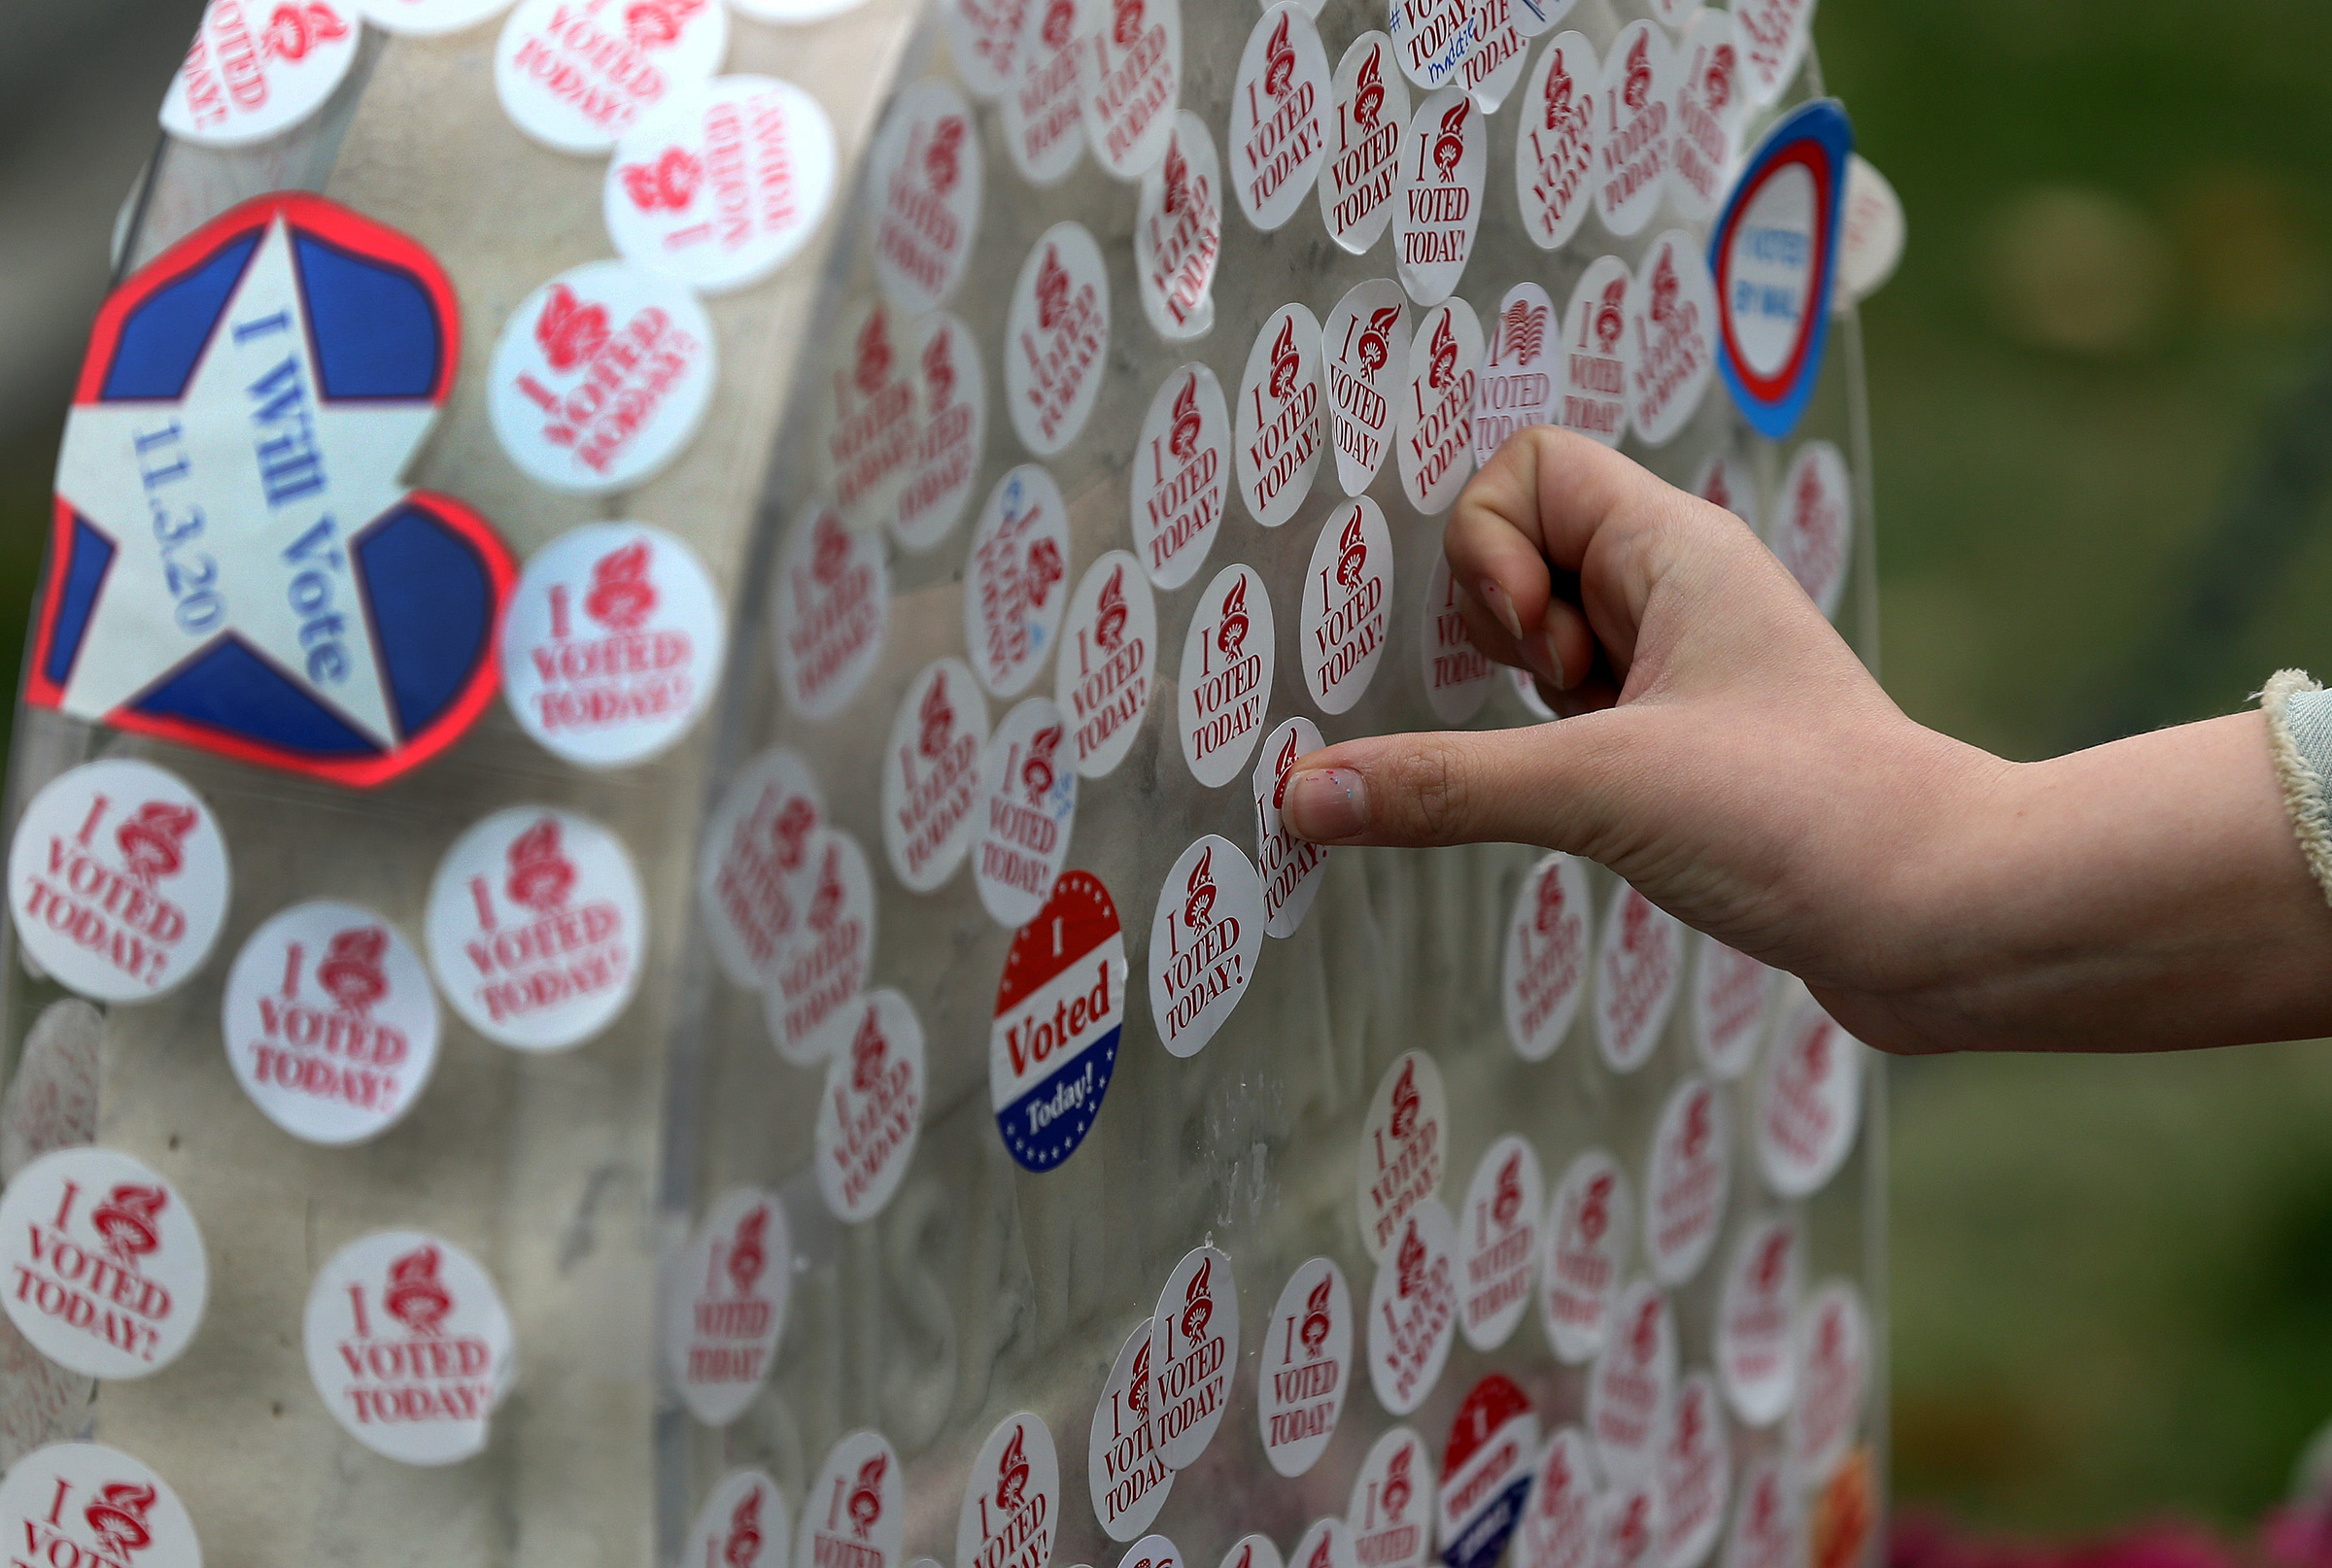 In an Election Day tradition, a visitor places their "I Voted" sticker on the gravestone of Susan B. Anthony in Rochester, NY on Nov. 3, 2020. (Jamie Germano—USA Today/Reuters)